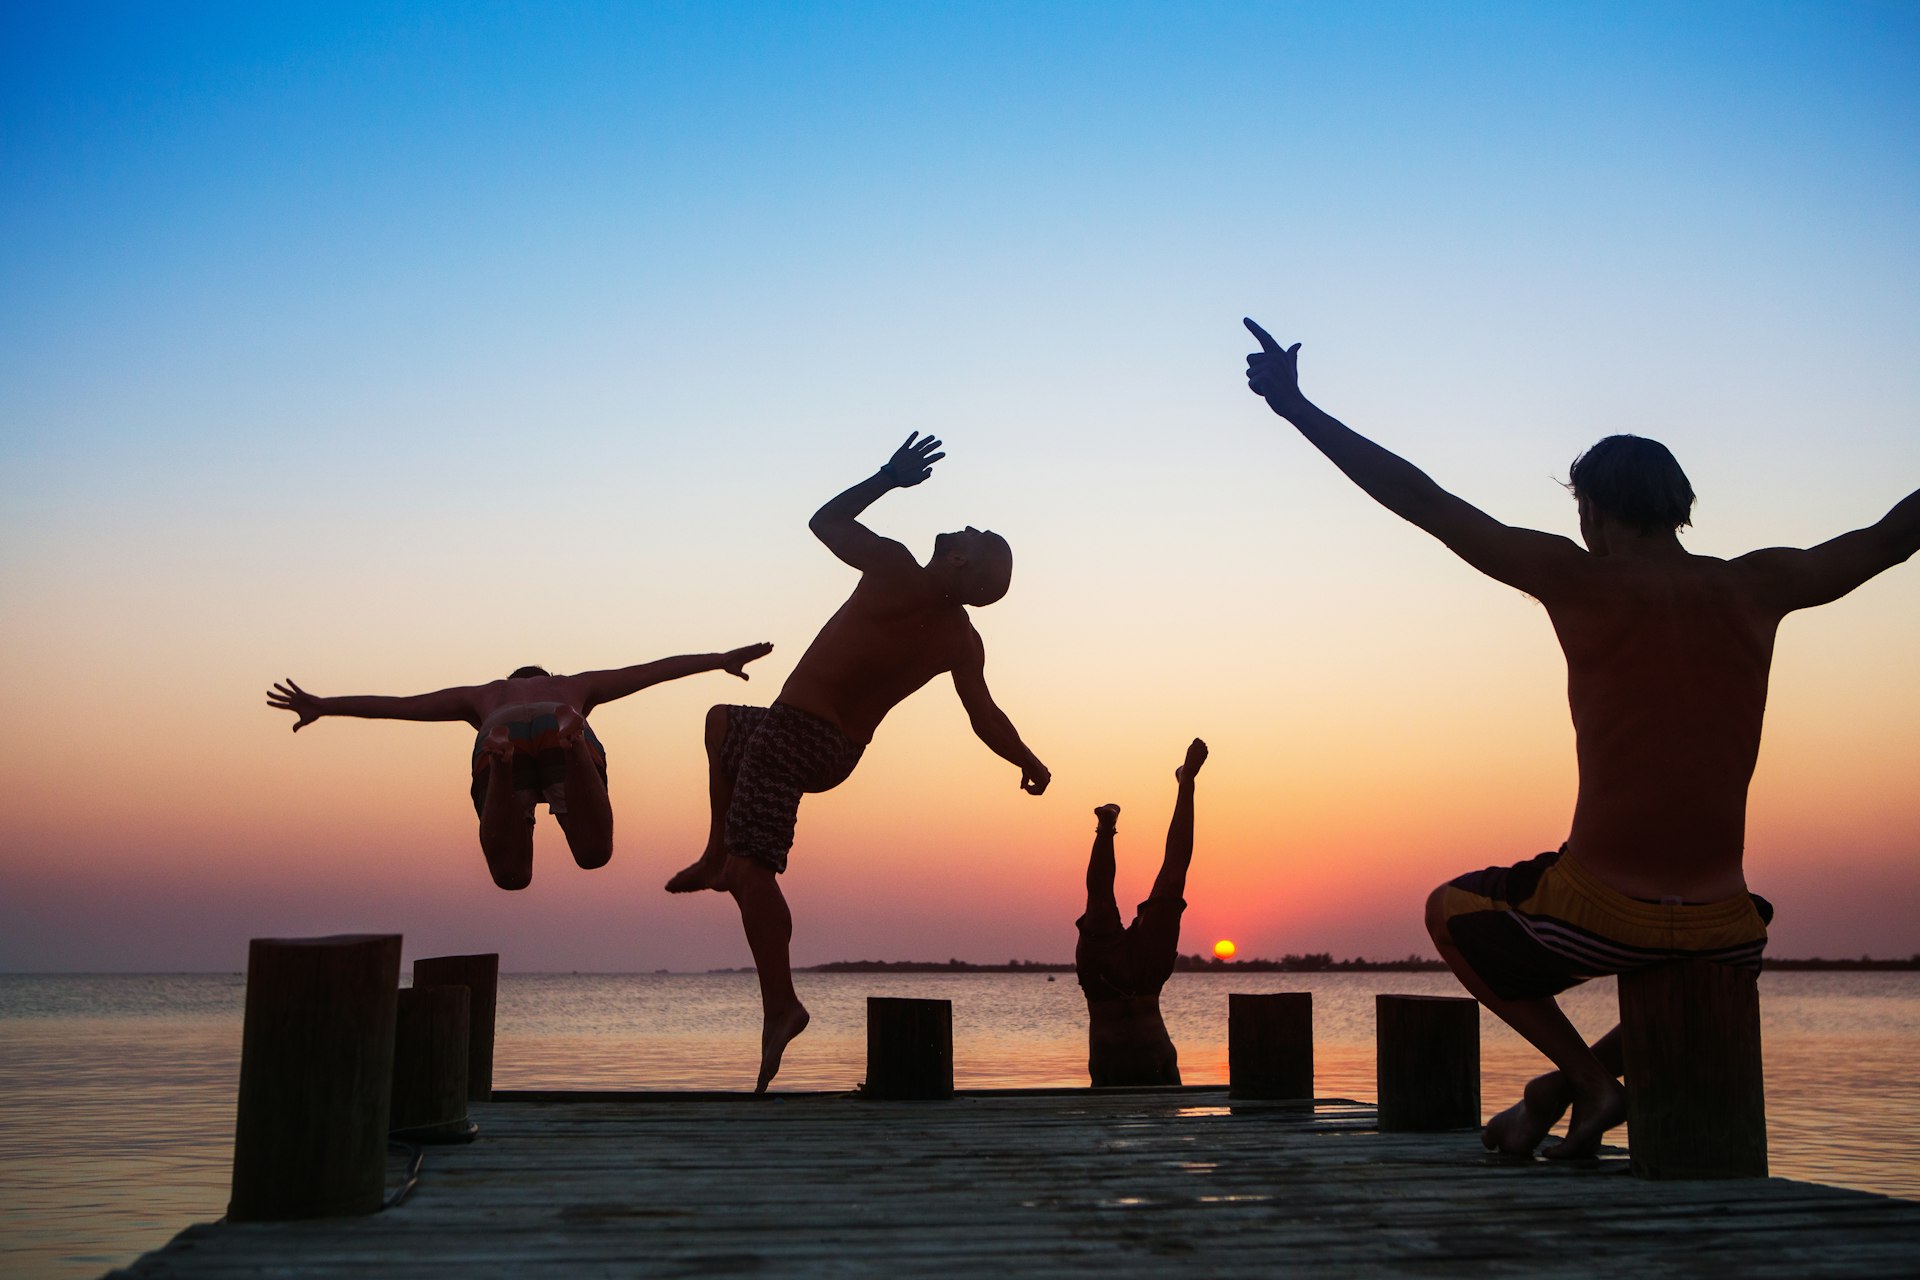 A group of men jump off the end of a pier at sunset